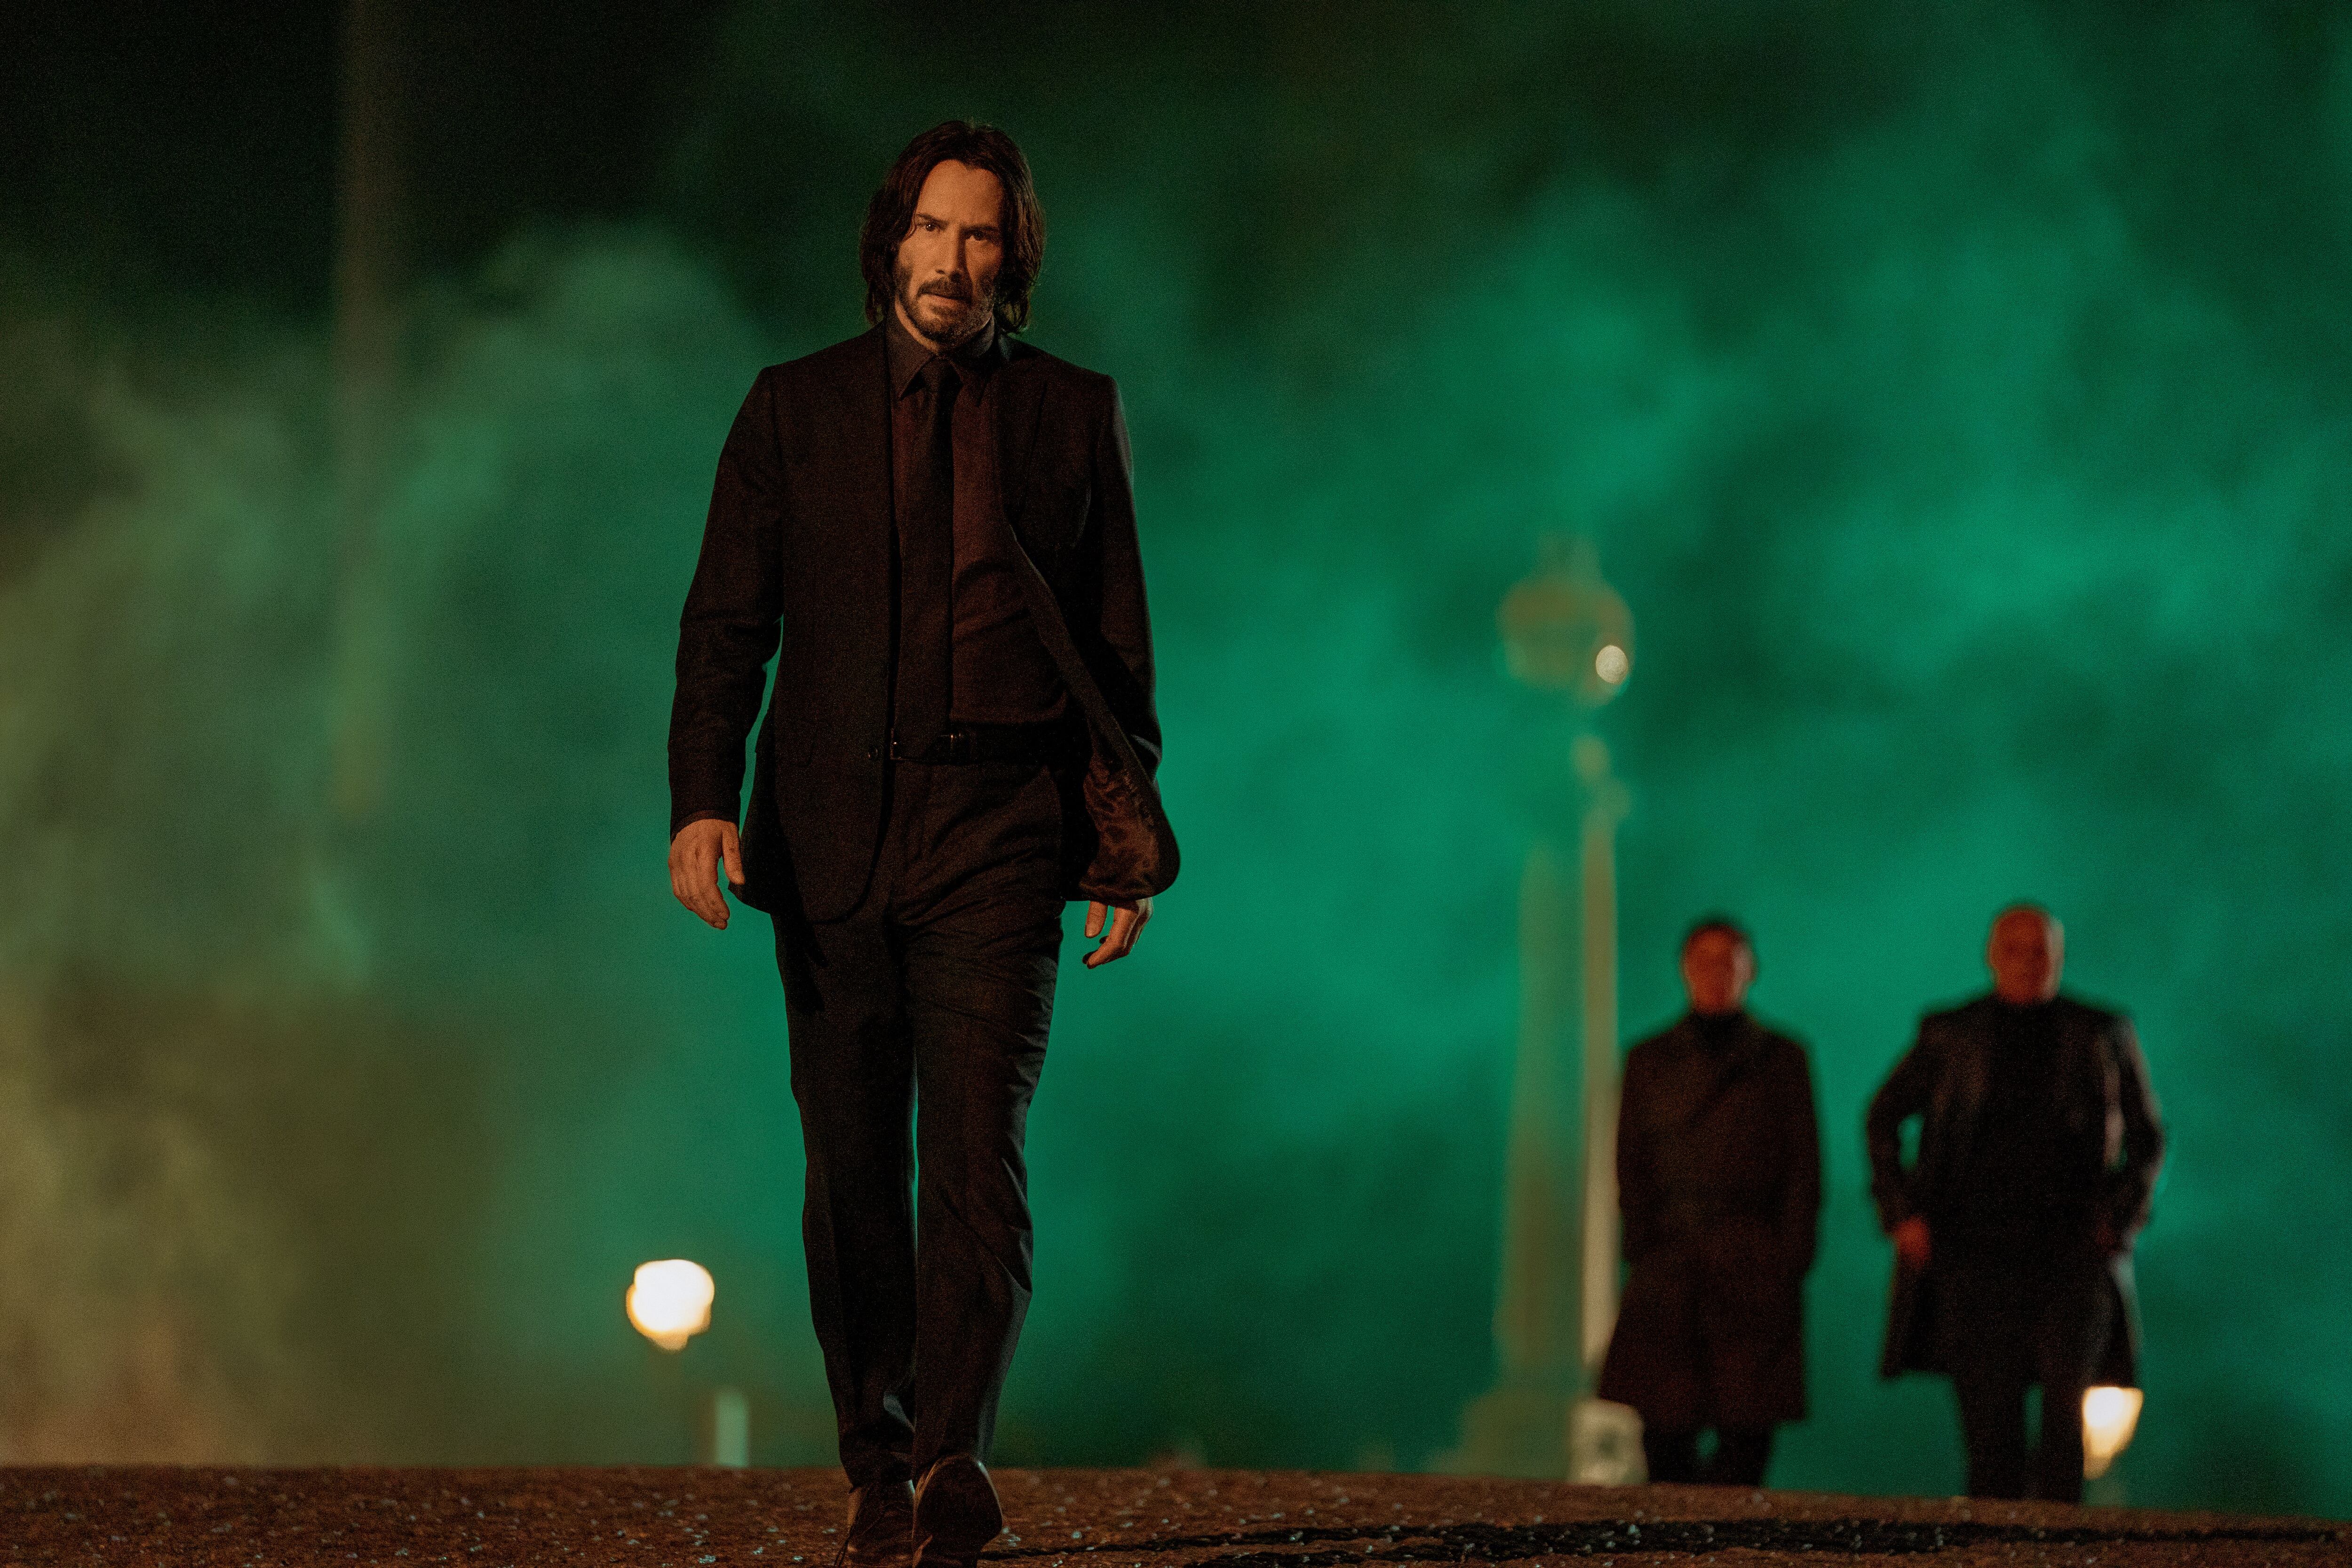 John Wick 4' Scheduled for Summer 2021 by Lionsgate